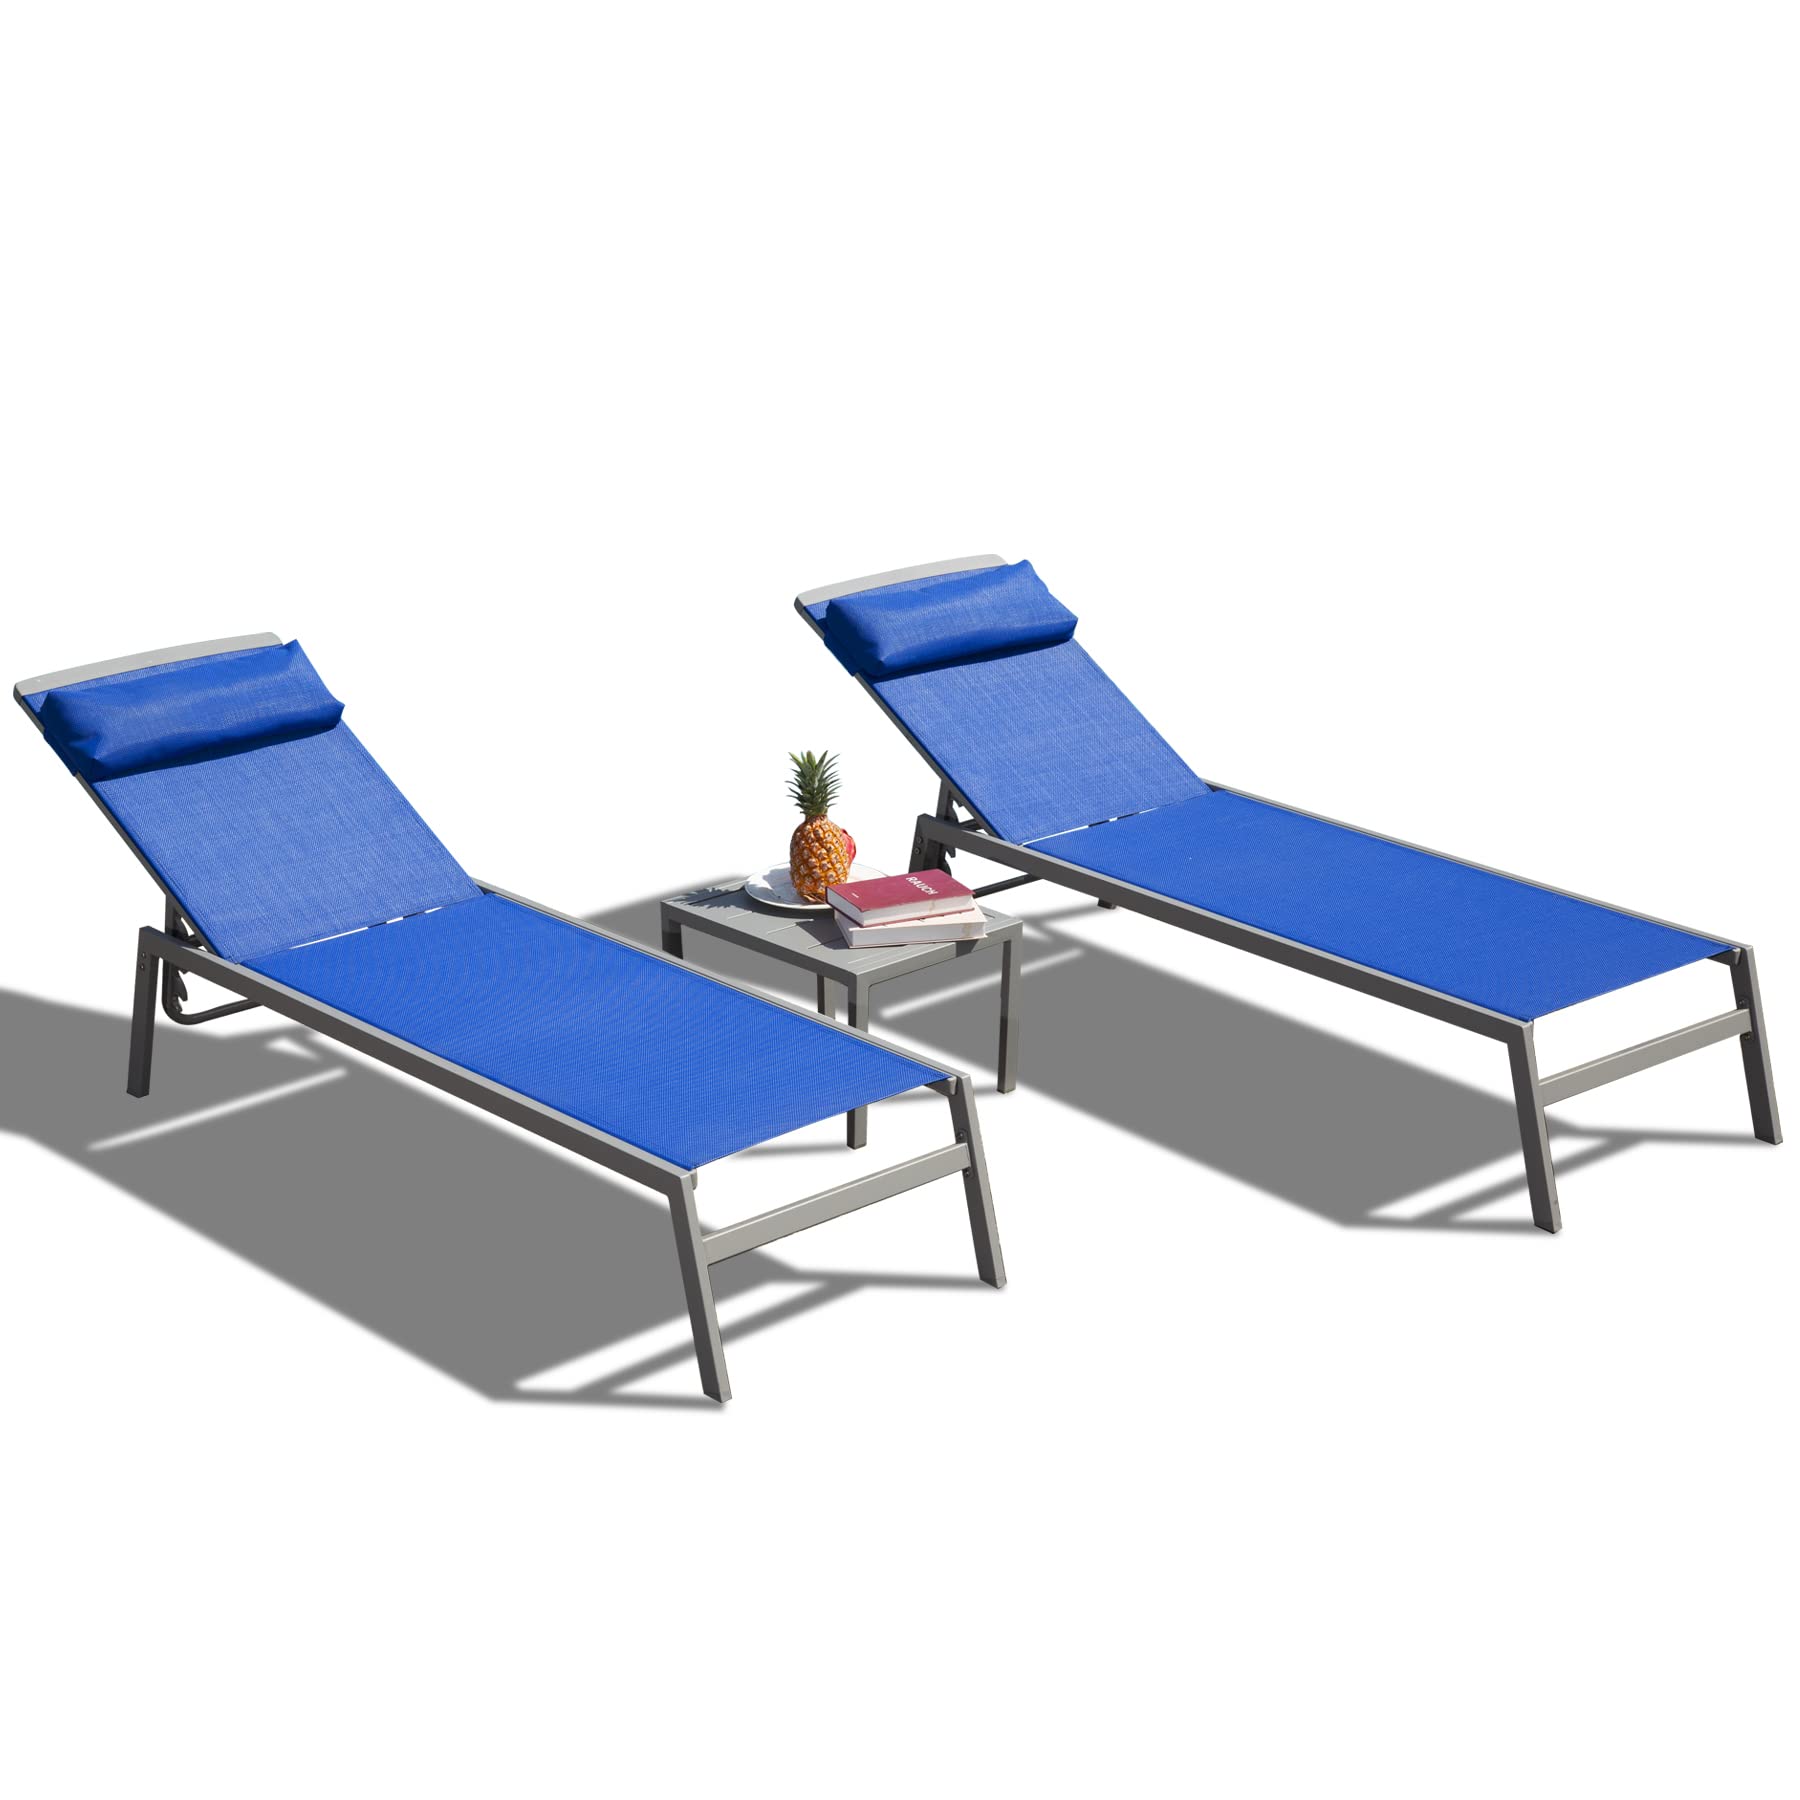 Domi Patio Chaise Lounge Set, Aluminum Pool Lounge Chairs with 5 Adjustable Position, Breathable Textilene Fabric, Sunbathing Pool Chairs with Headrest and Side Table, Blue